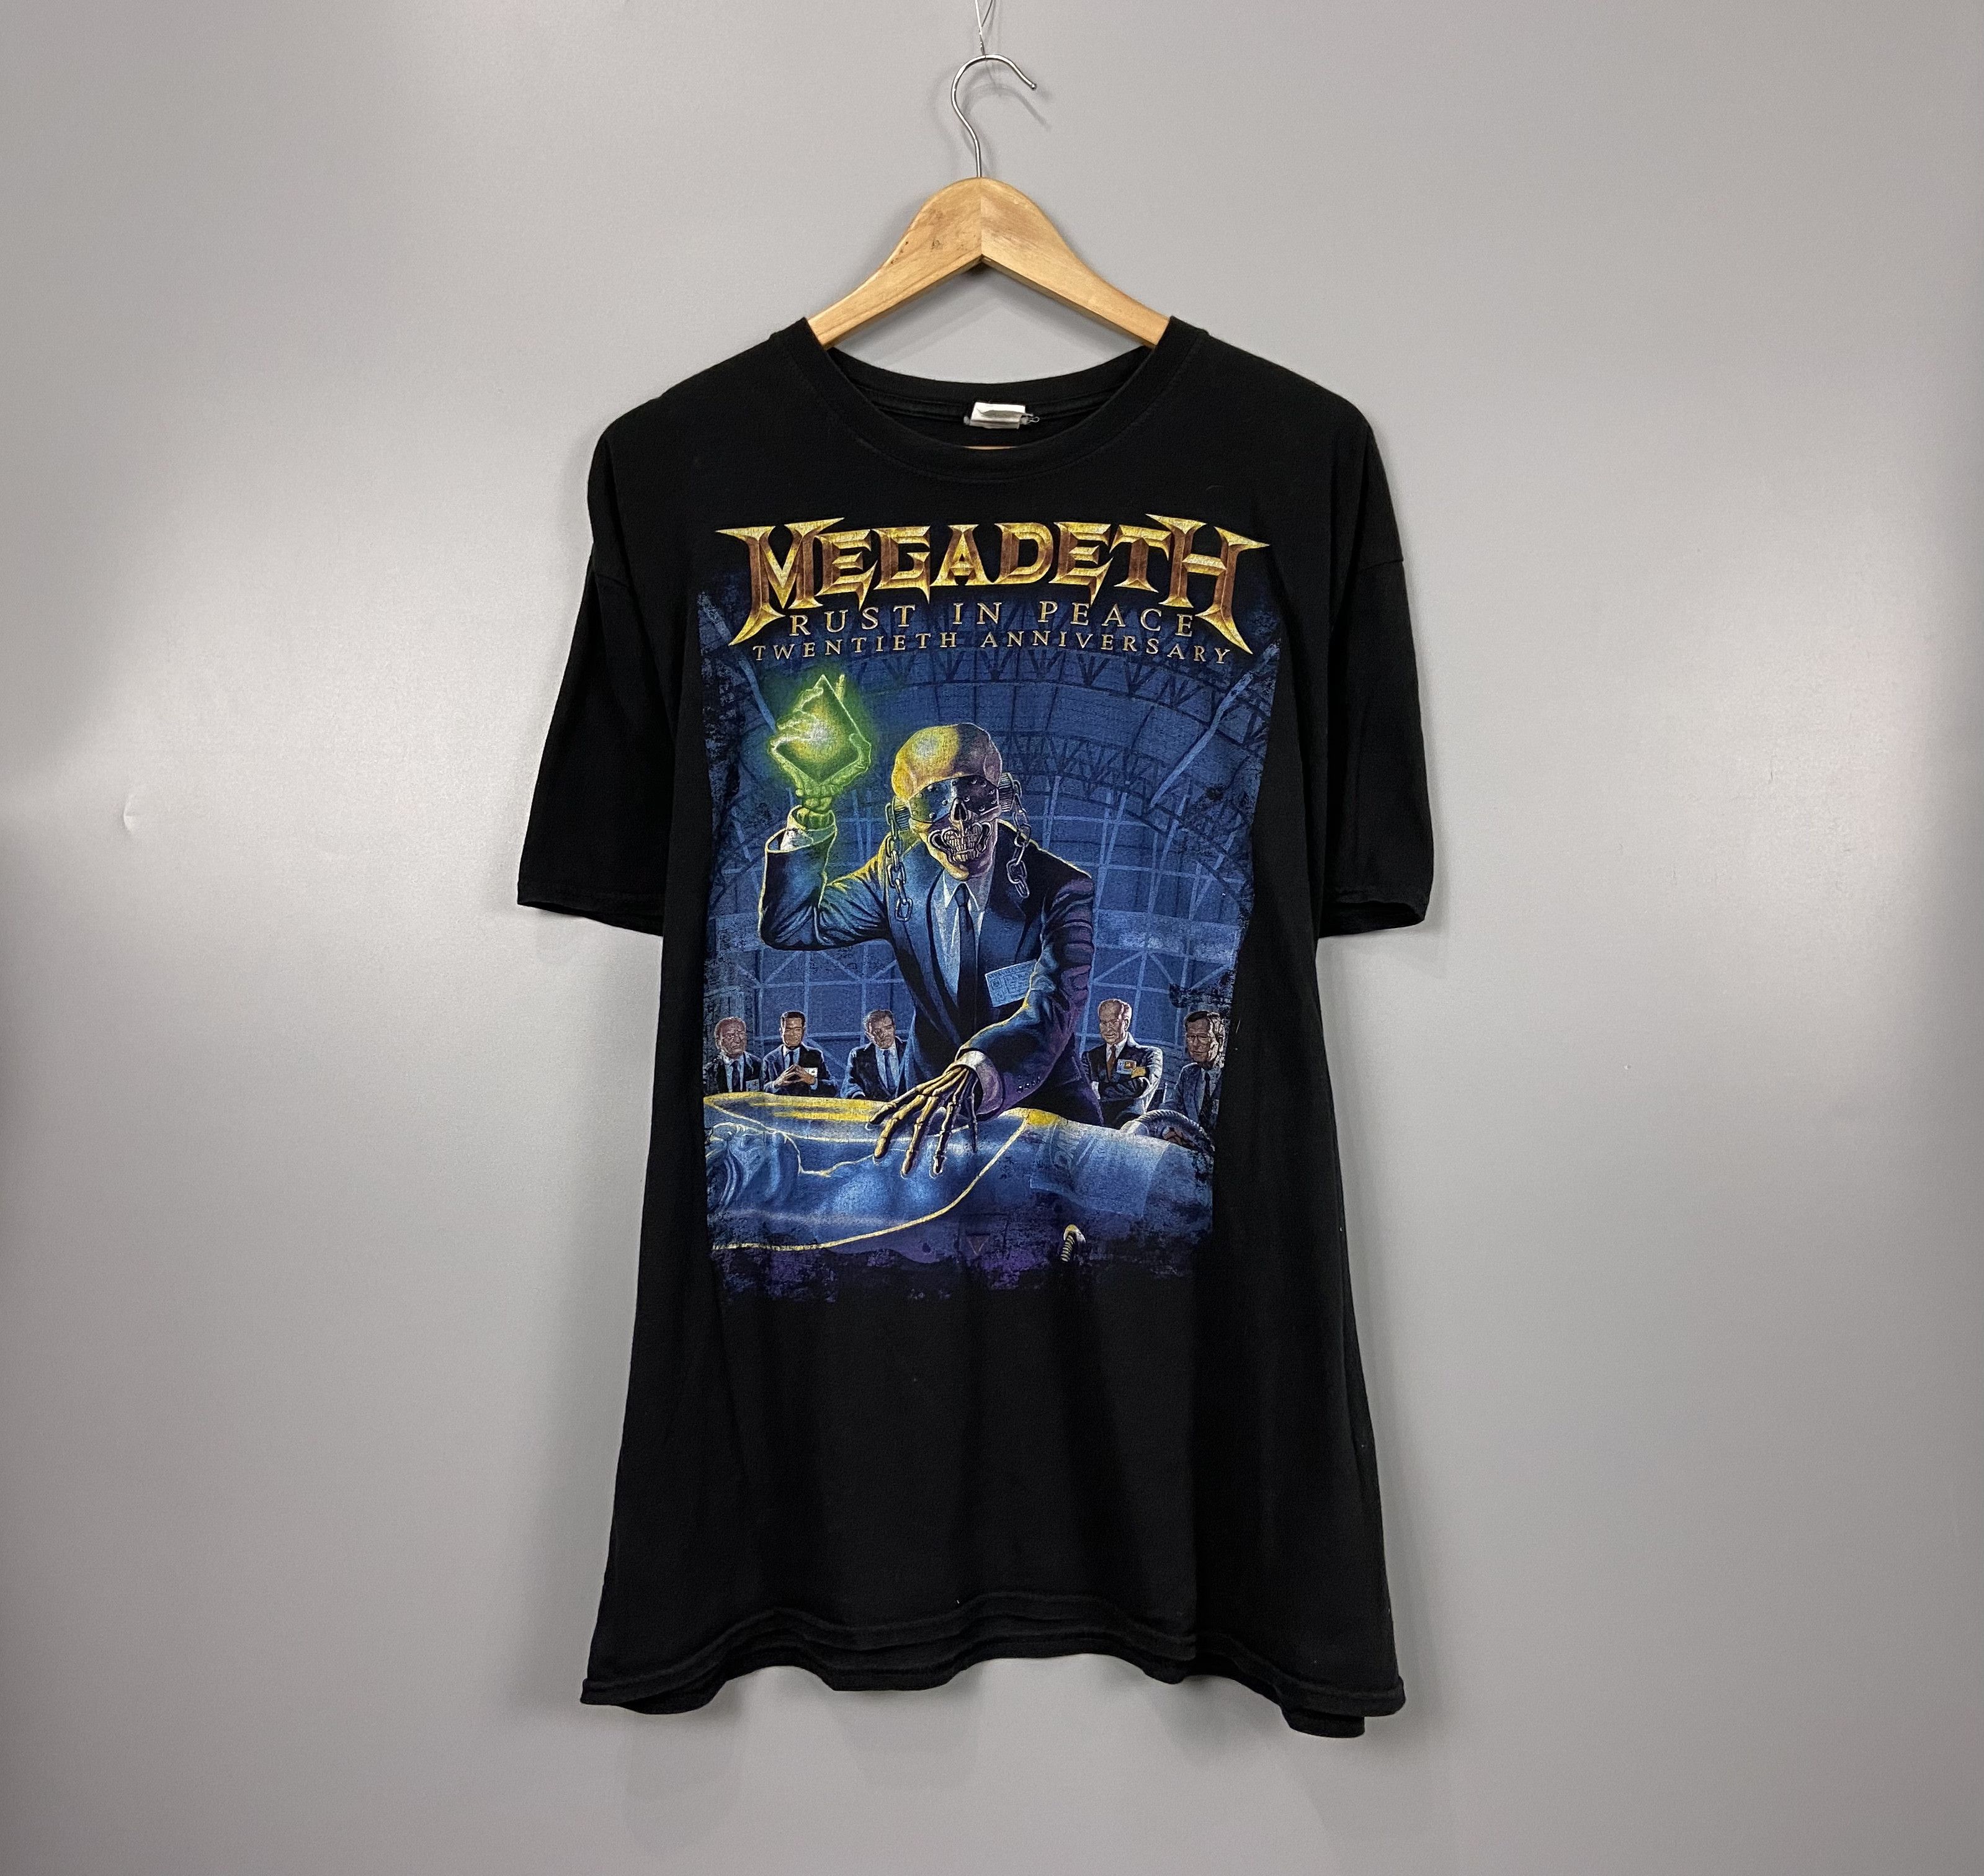 Rock Tees Megadeath rust in peace t shirts | Grailed